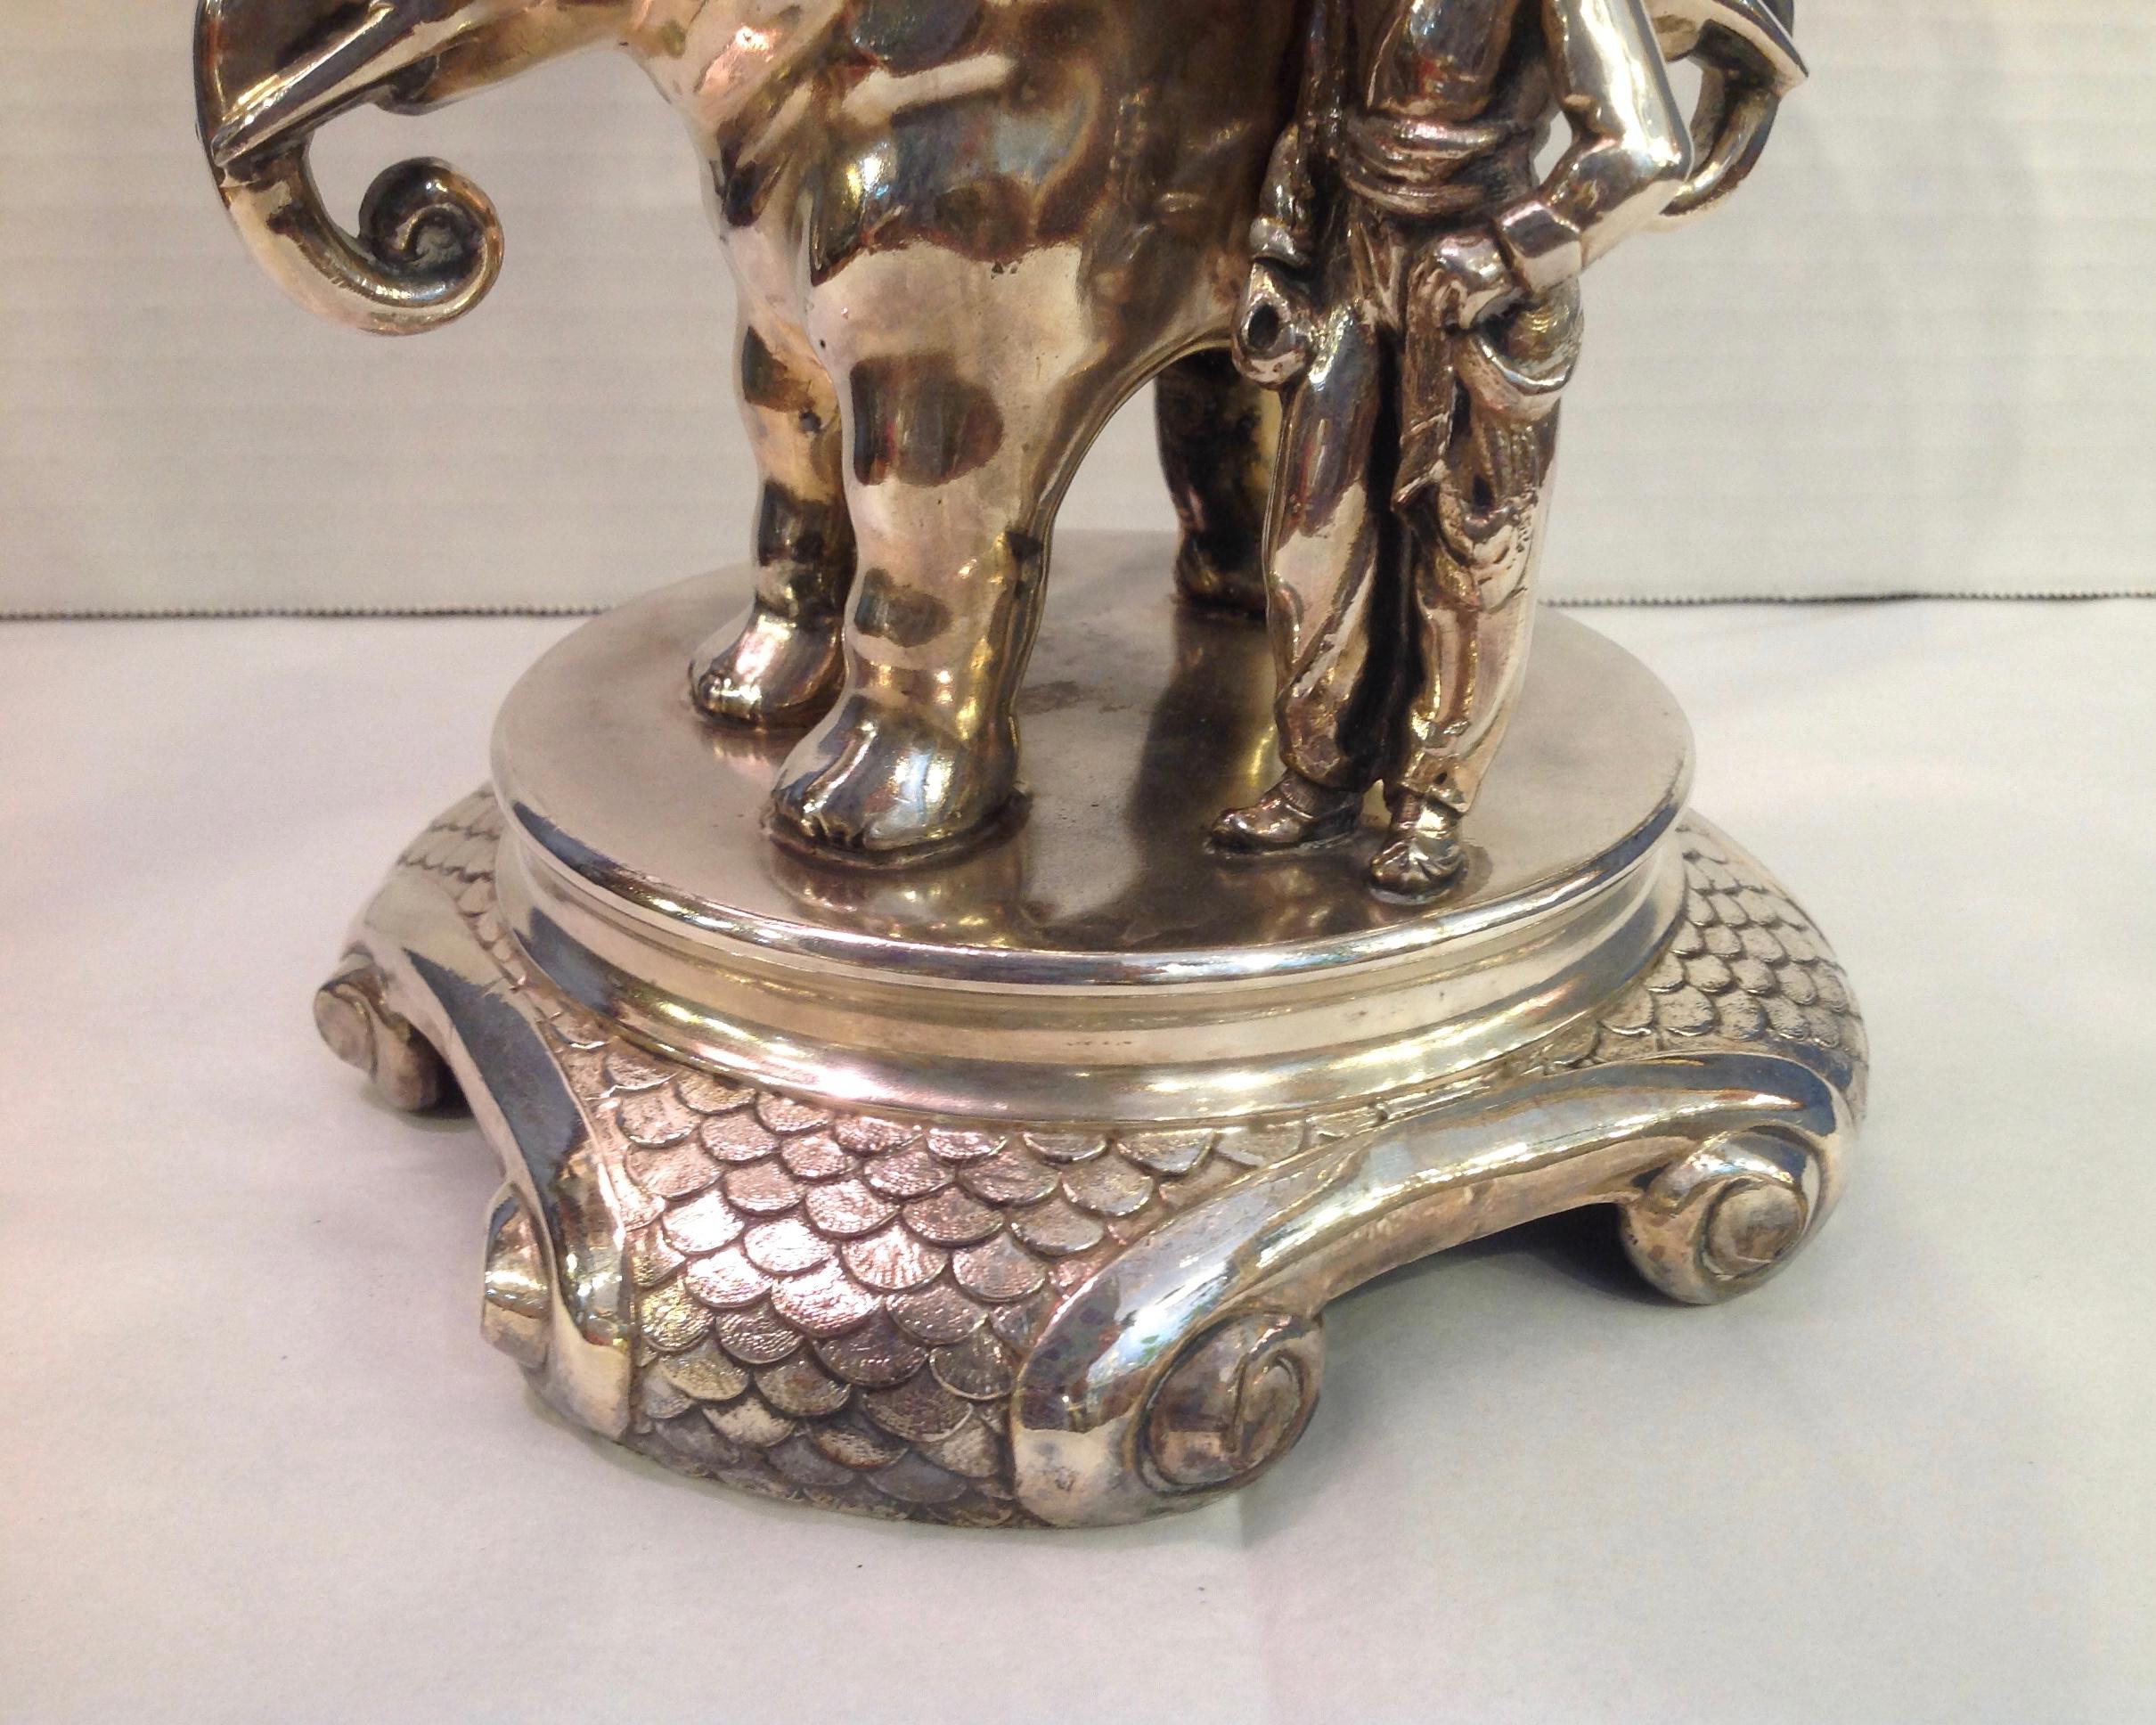 Superb 19th Century Anglo-Indian Style Elephant Motif Centerpiece / Epergne 2